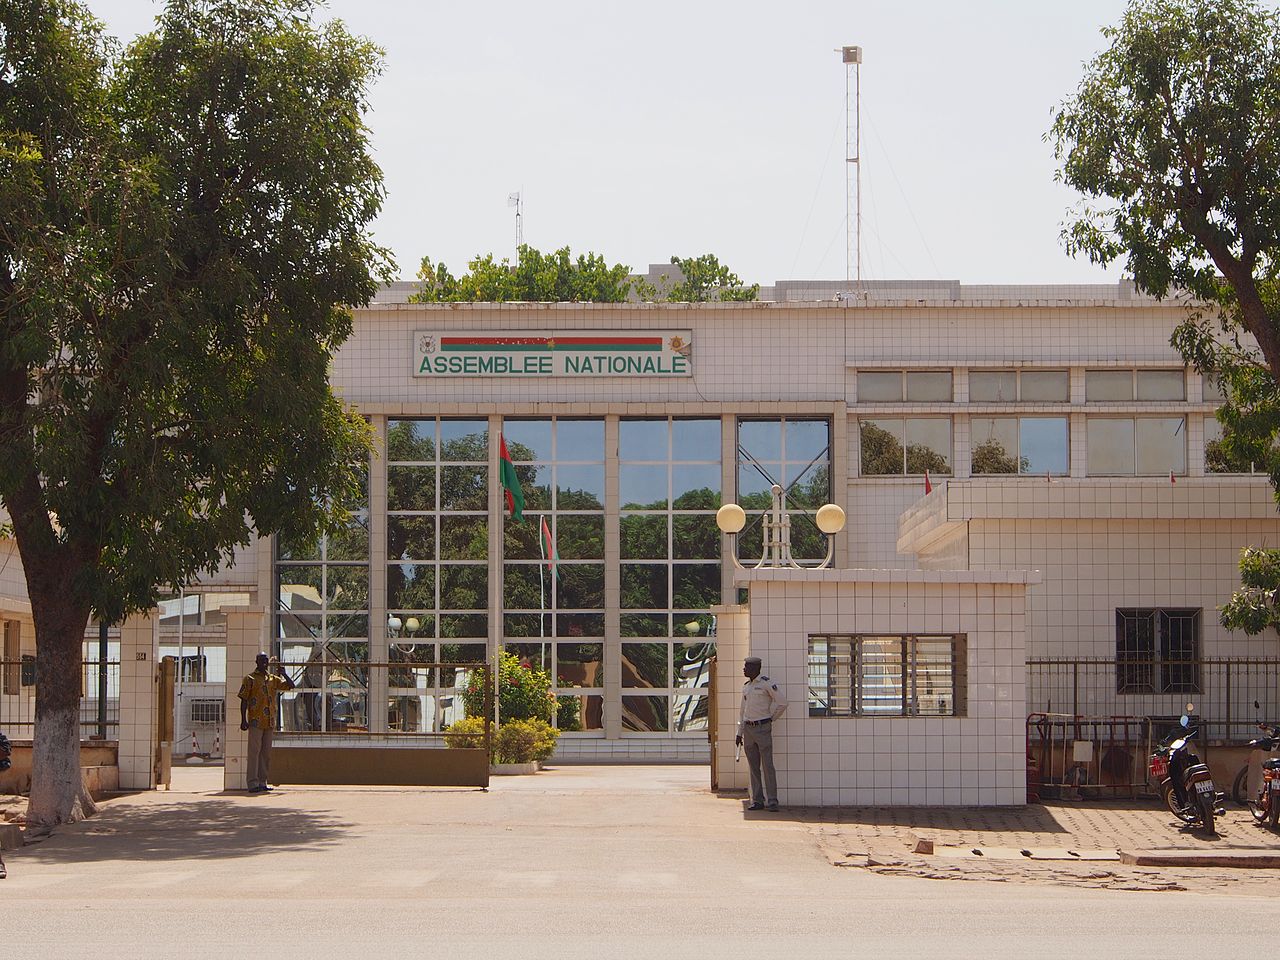 The building of the national assembly of Burkina Faso in downtown Ouagadougou